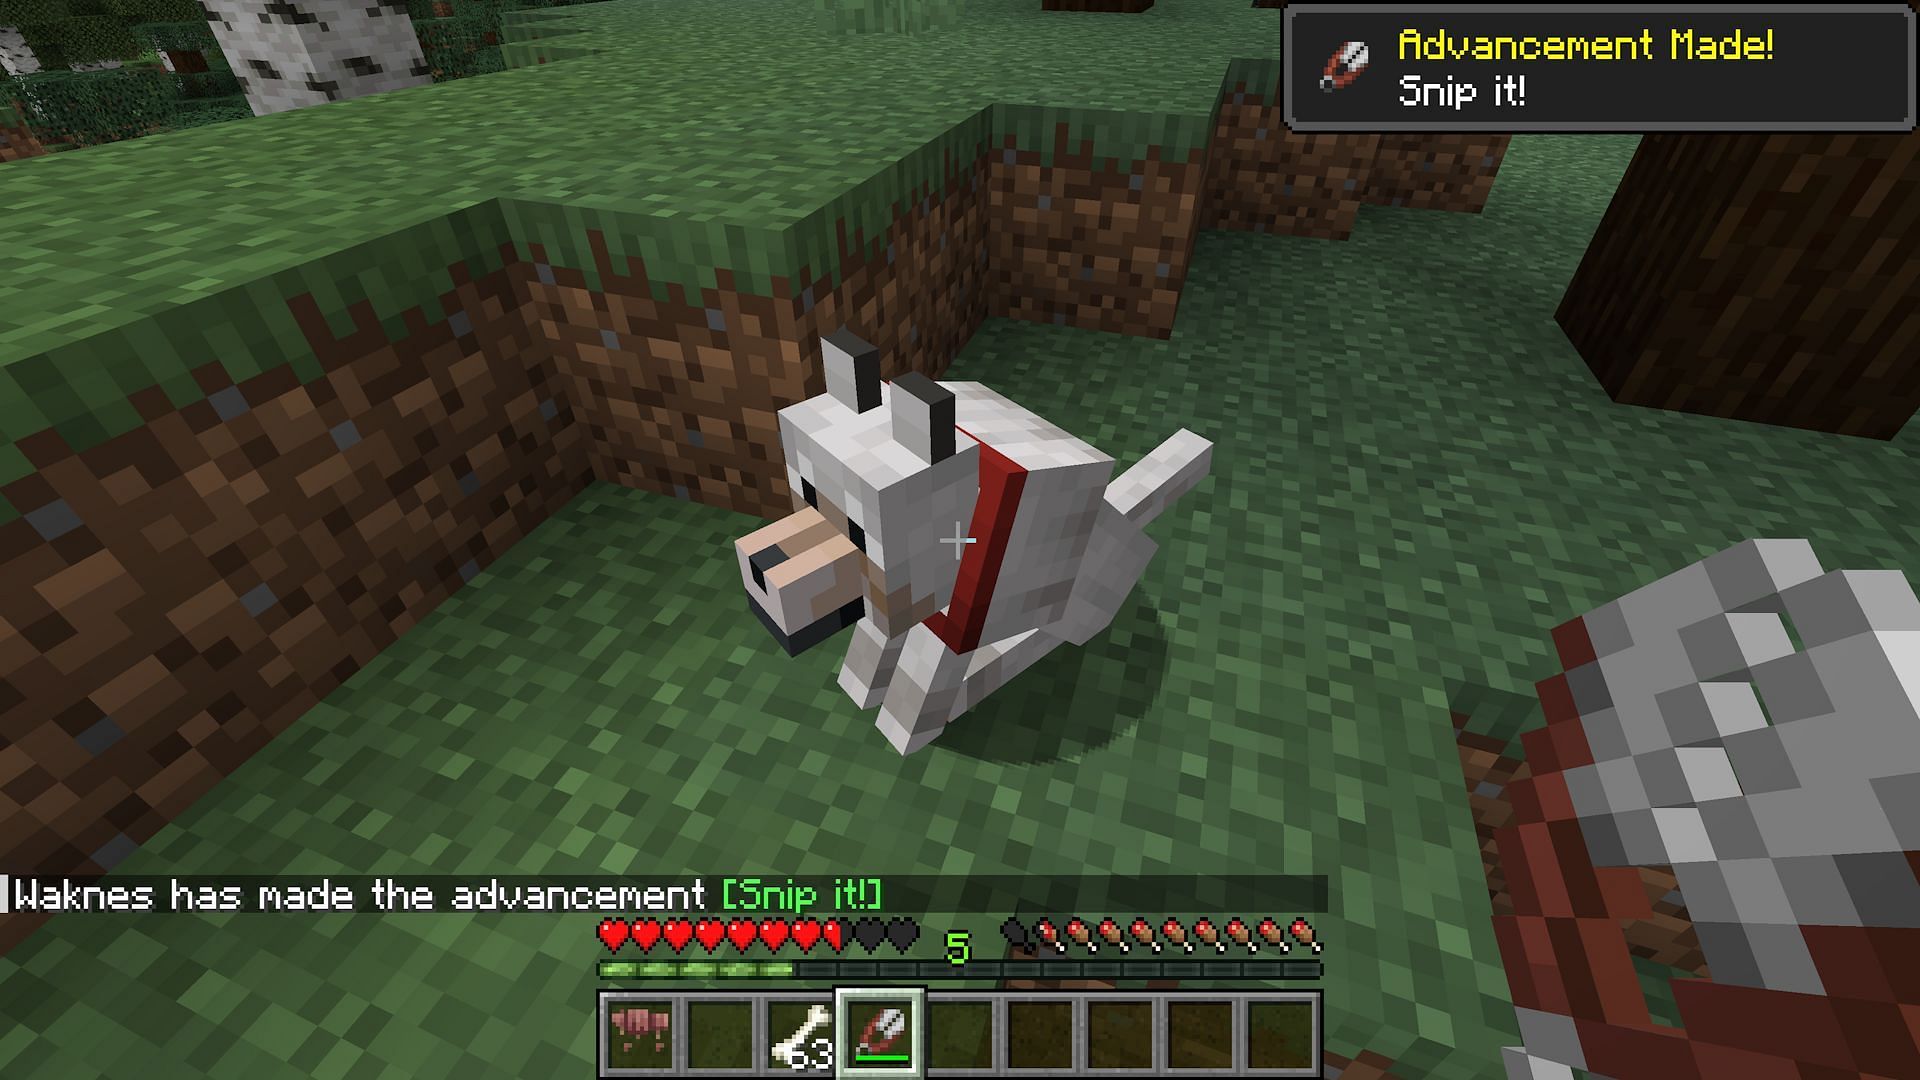 Actually getting the advancement is quite simple, compared to the rest of the steps (Image via Mojang)